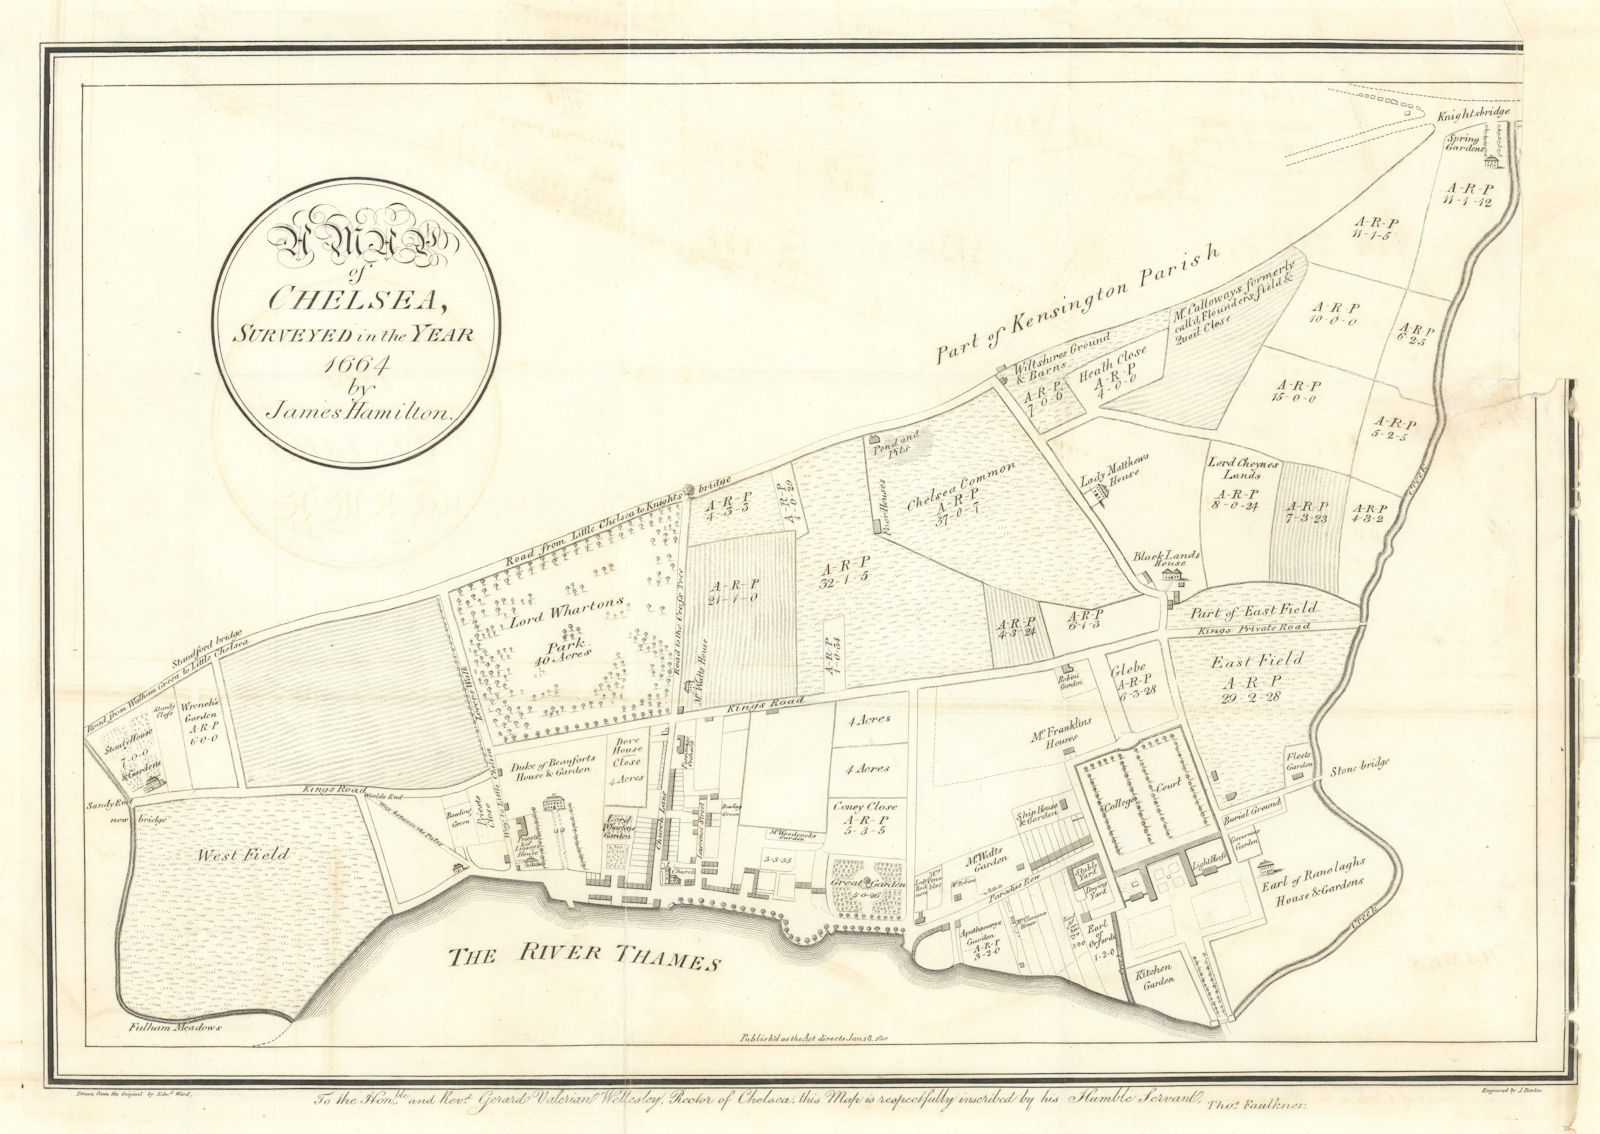 "Map of Chelsea surveyed in the year 1664 by James Hamilton". FAULKNER 1810